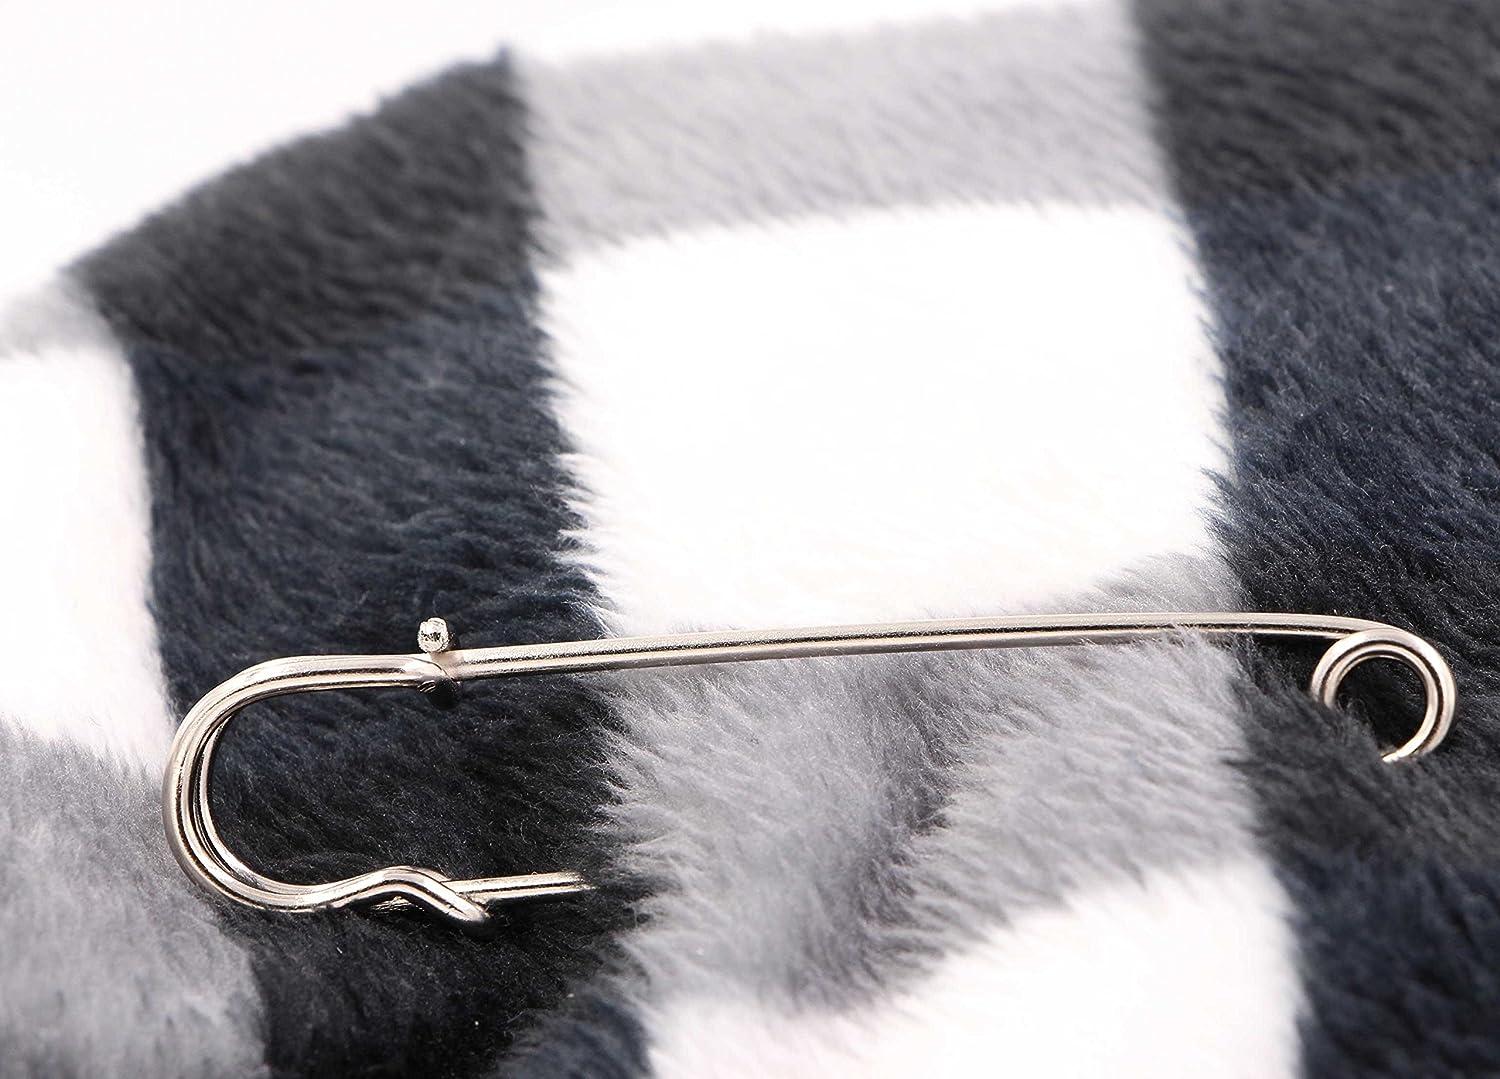 3inch Large Safety Pins for Clothes Big Safety Pins Heavy Giant Safety Pin for Fashion, Sewing, Quilting, Blankets, Upholstery, Laundry and Craft